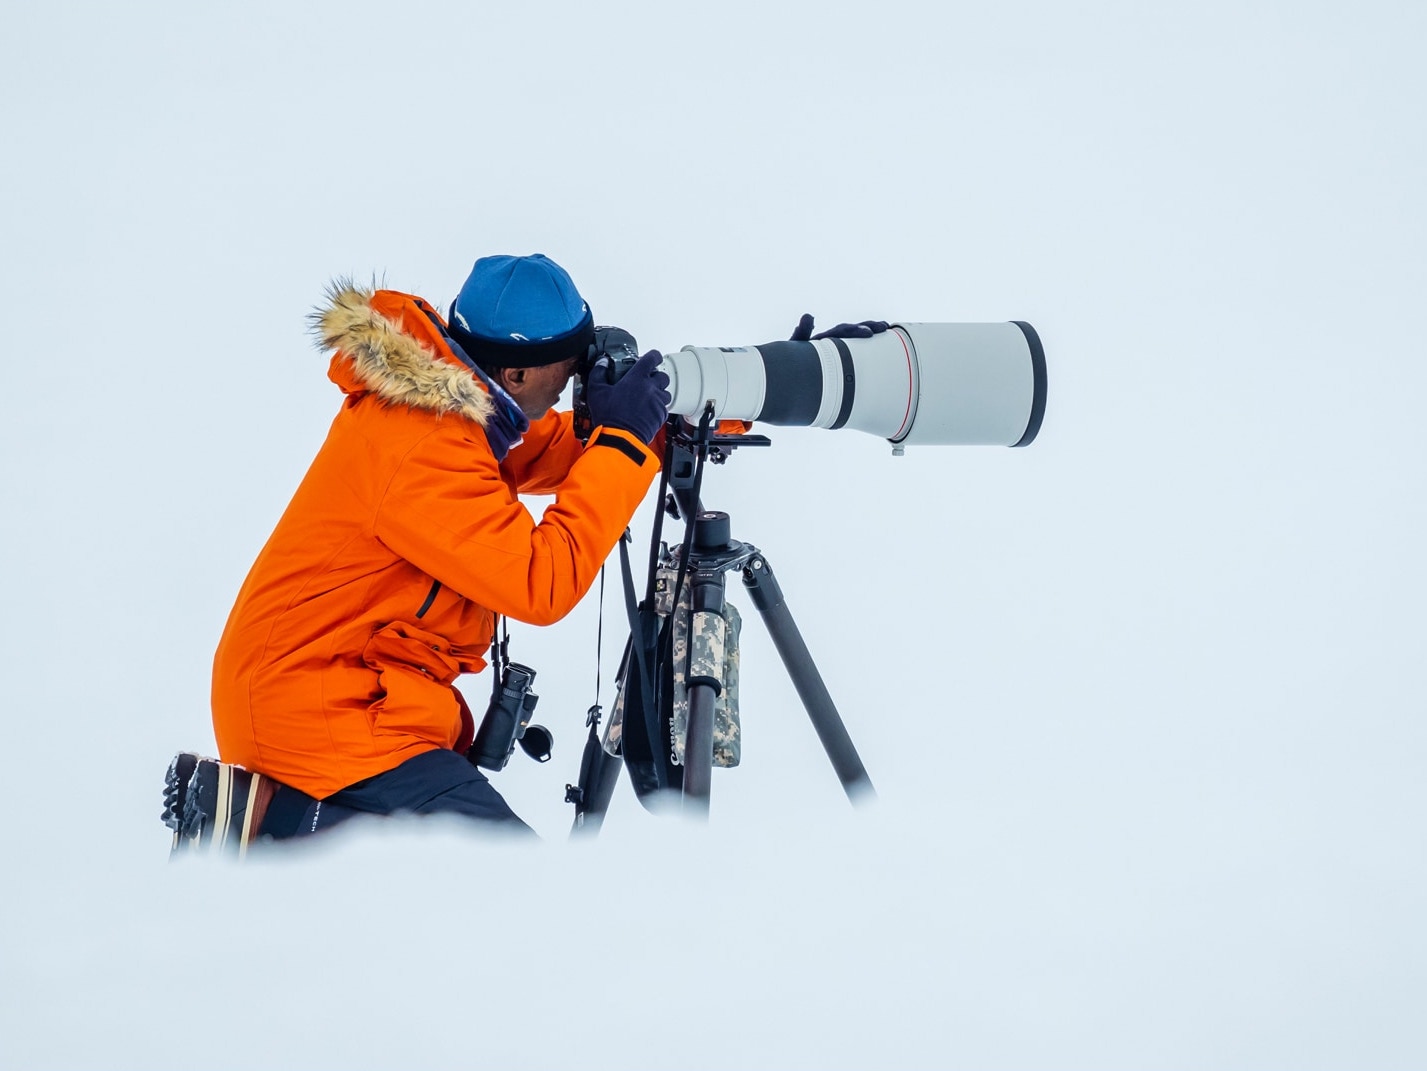 National Geographic photographer Ralph Lee Hopkins, founder and director of the Expedition Photography program for the Lindblad-National Geographic alliance, gives his top five tips for polar photography.